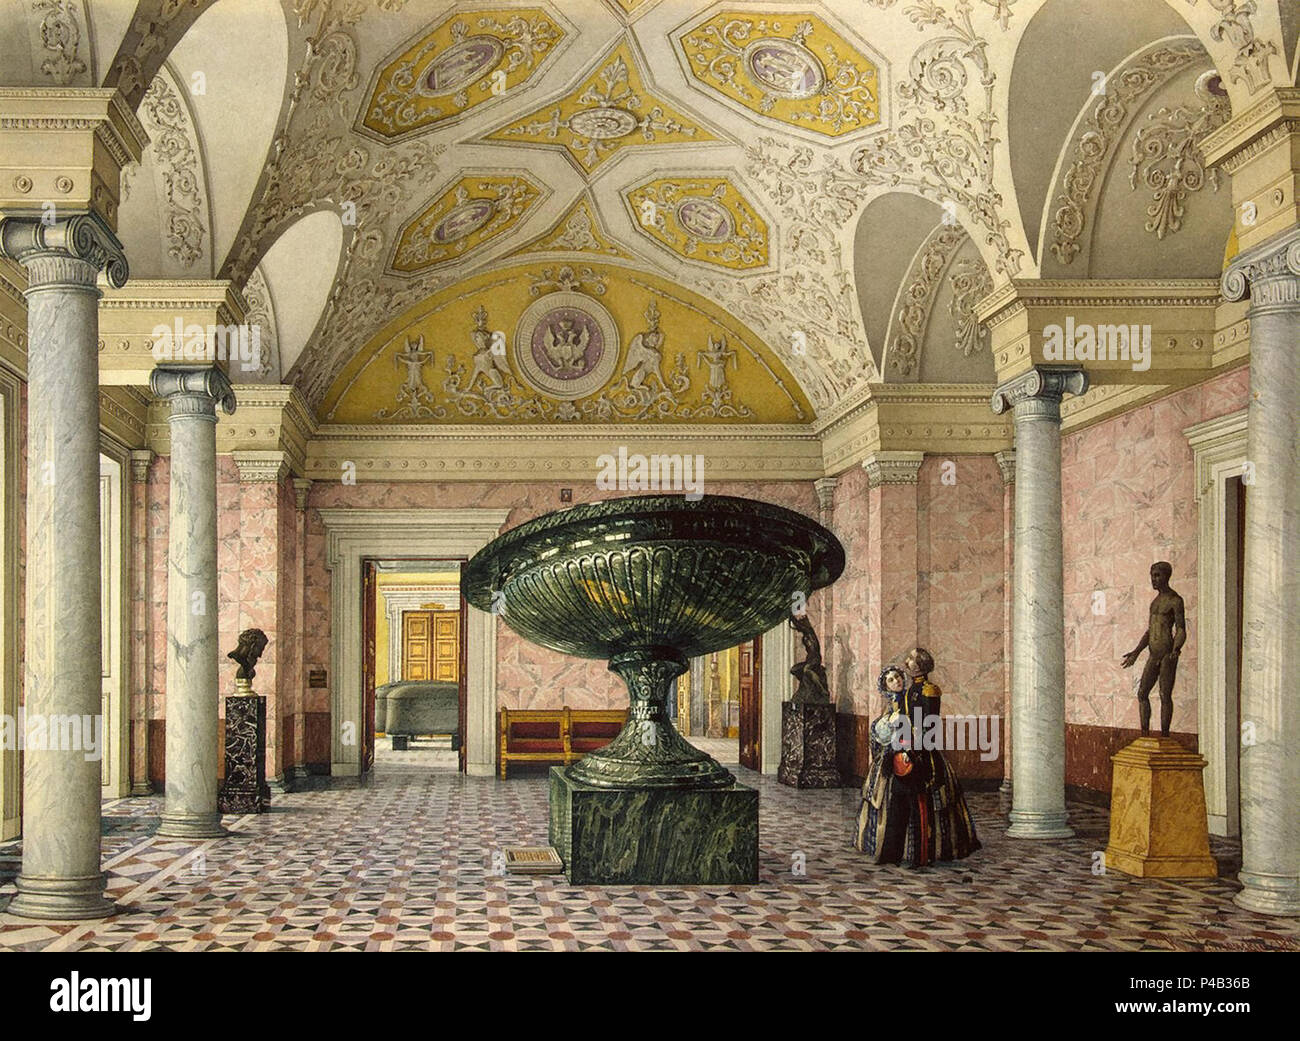 Ukhtomsky  Konstantin Andreyevich - Interiors of the New Hermitage - the Room Showing the Kolyvan Vase Stock Photo